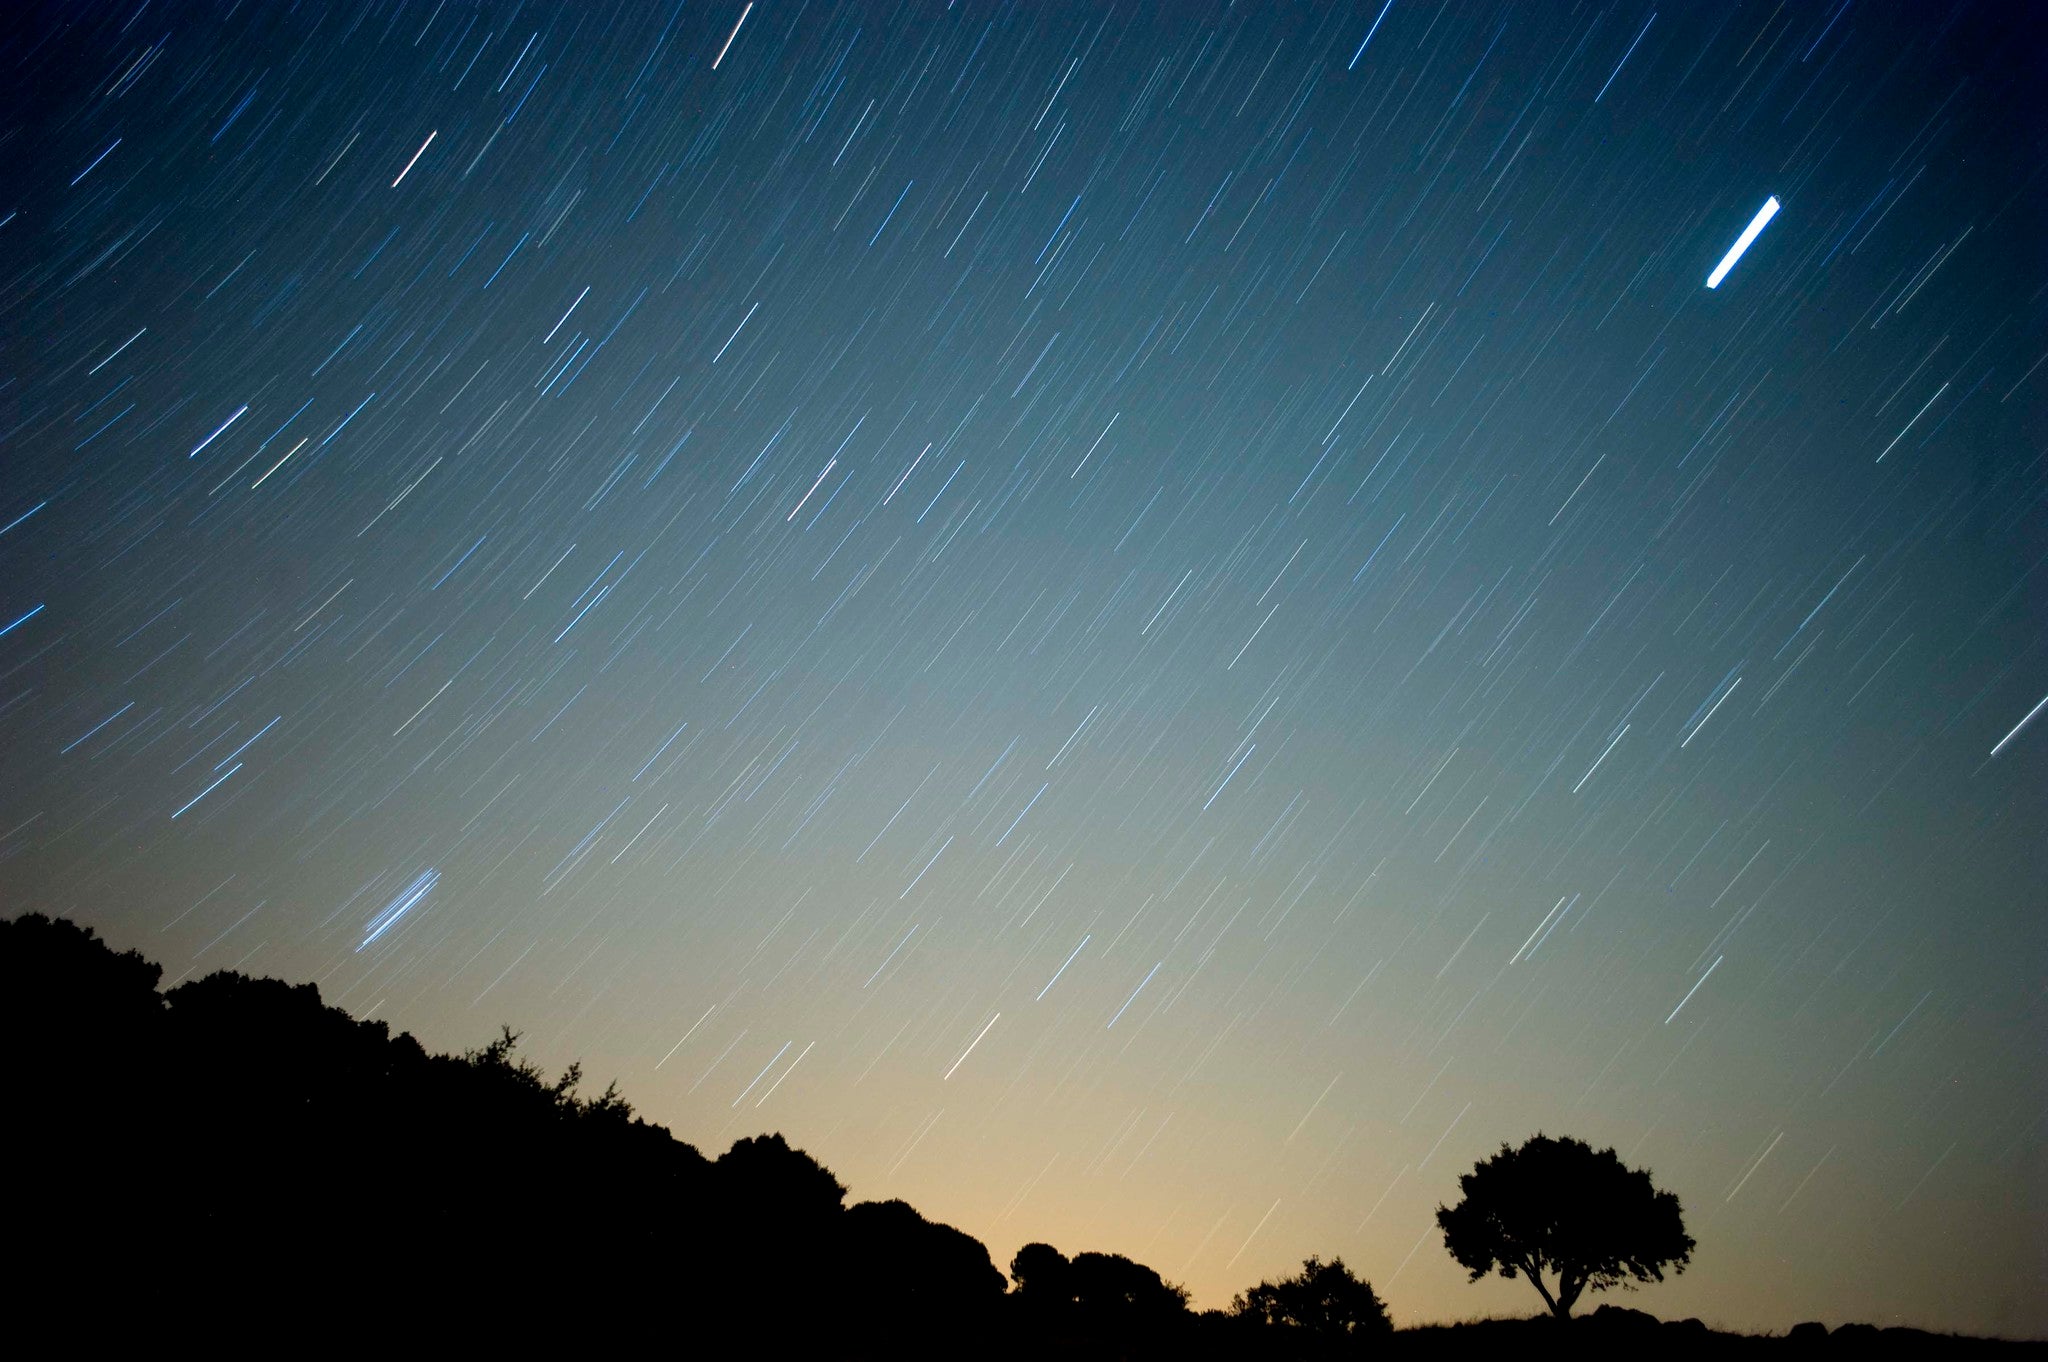 The best way to see the meteor shower is with the naked eye, once you've allowed yourself to adjust to the darkness